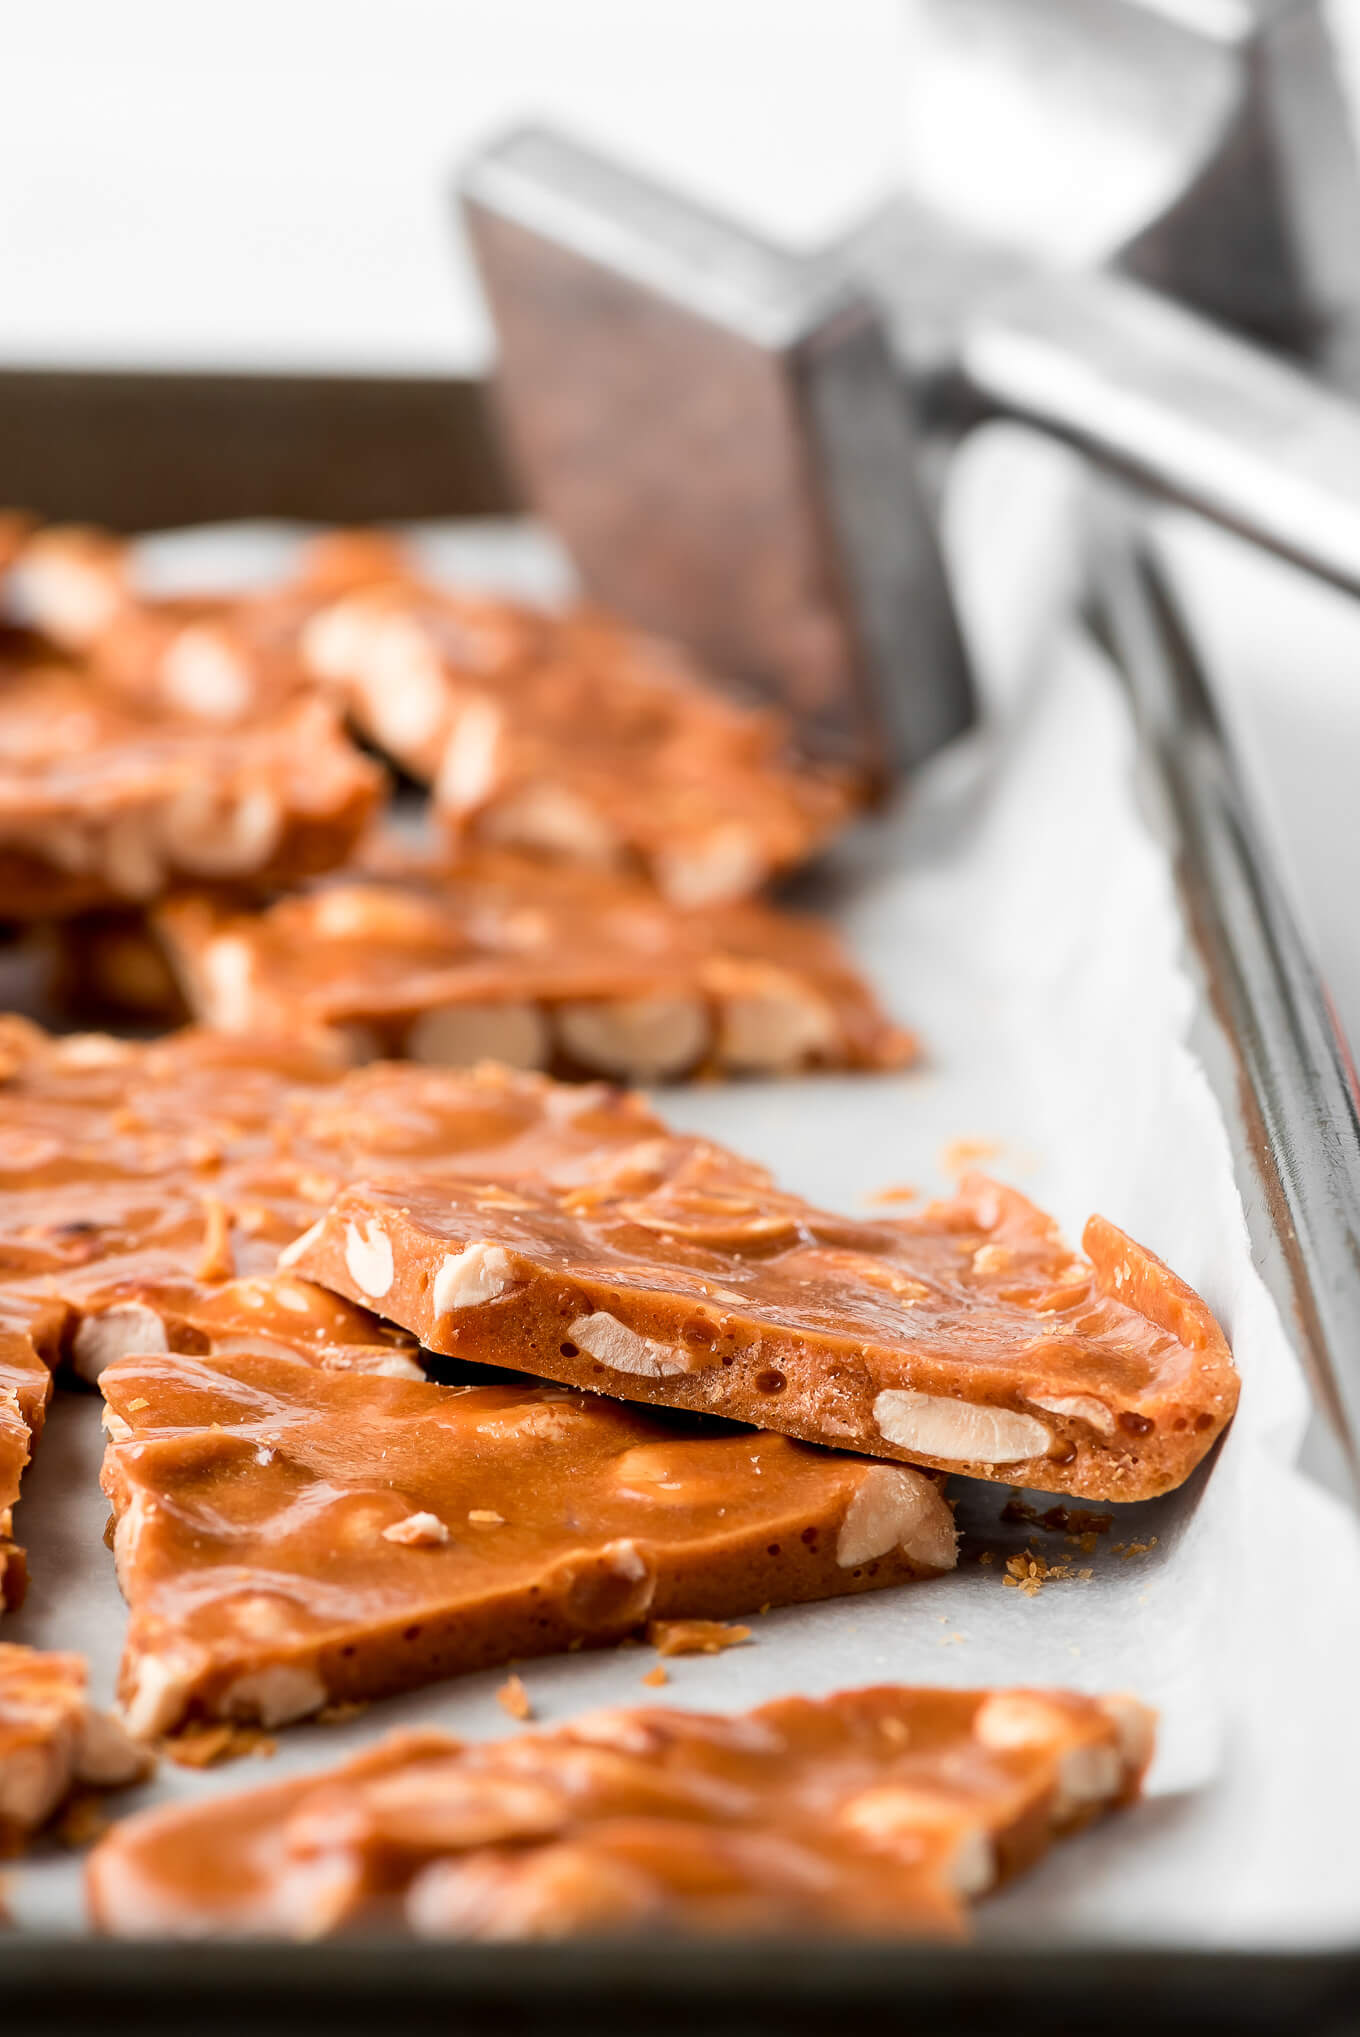 A close up shot of the inside of Peanut Brittle showing off the peanuts and air bubbles.